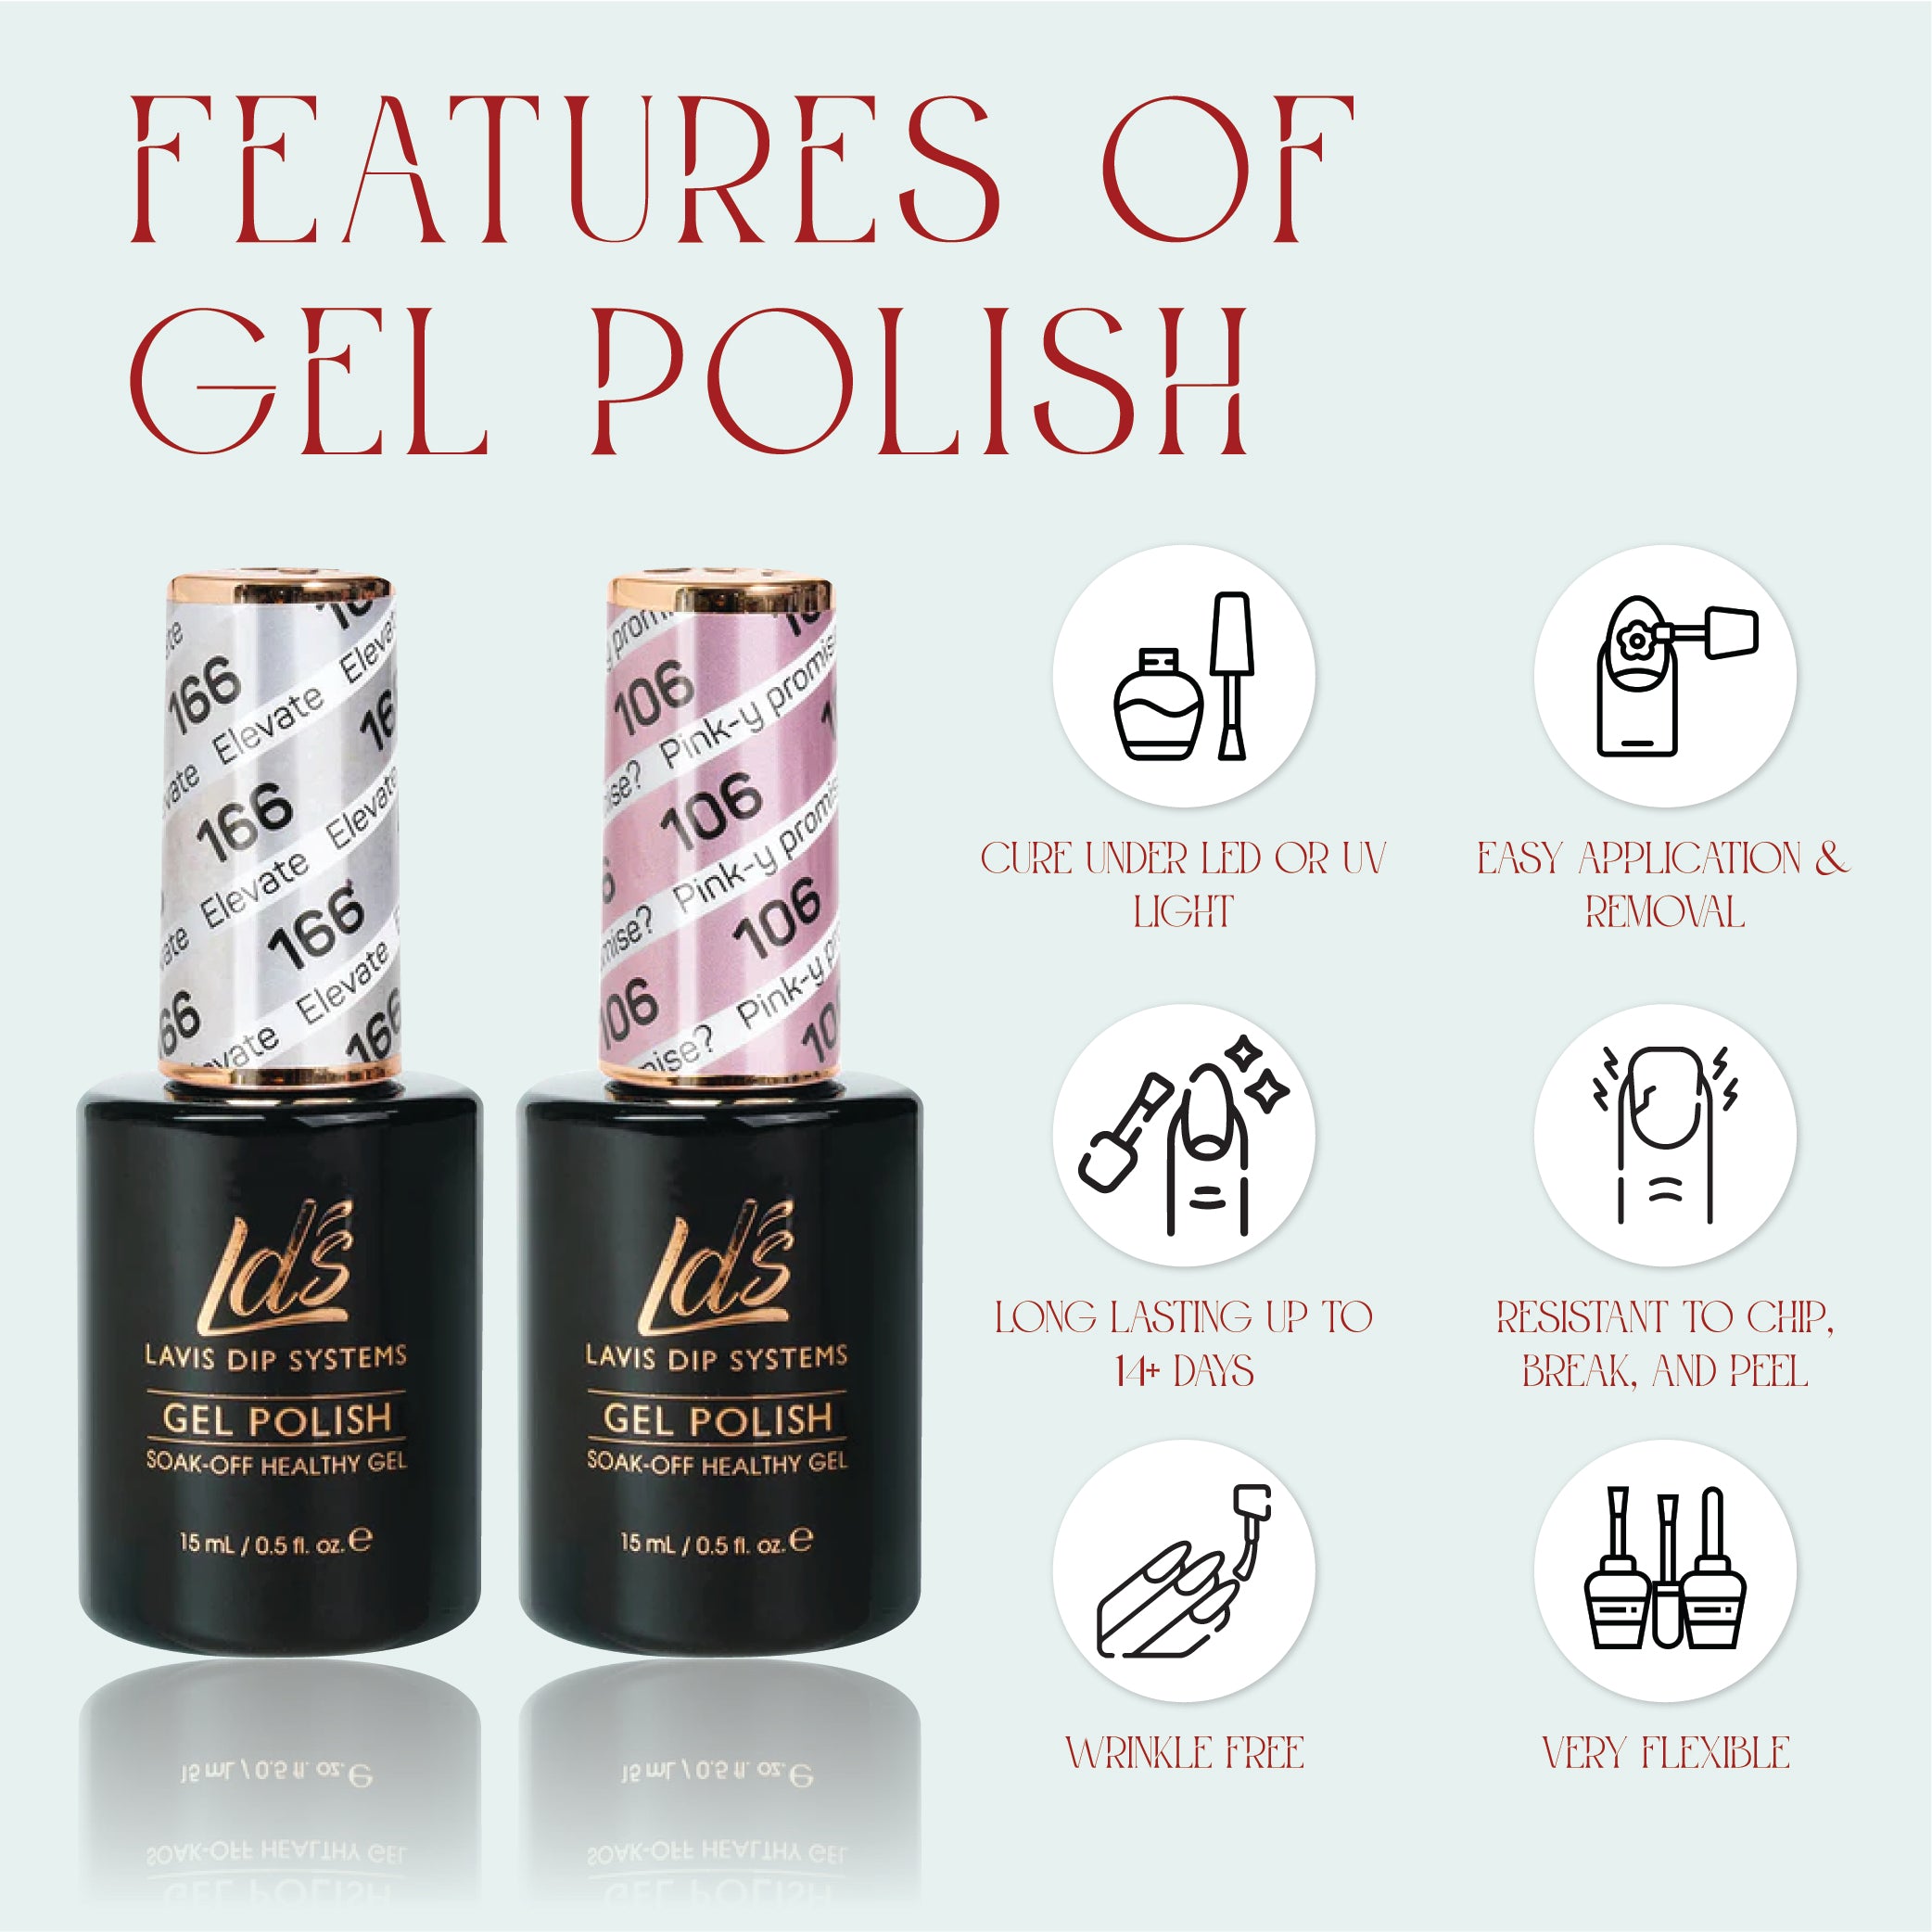 LDS 124 Harmony - LDS Healthy Gel Polish & Matching Nail Lacquer Duo Set - 0.5oz